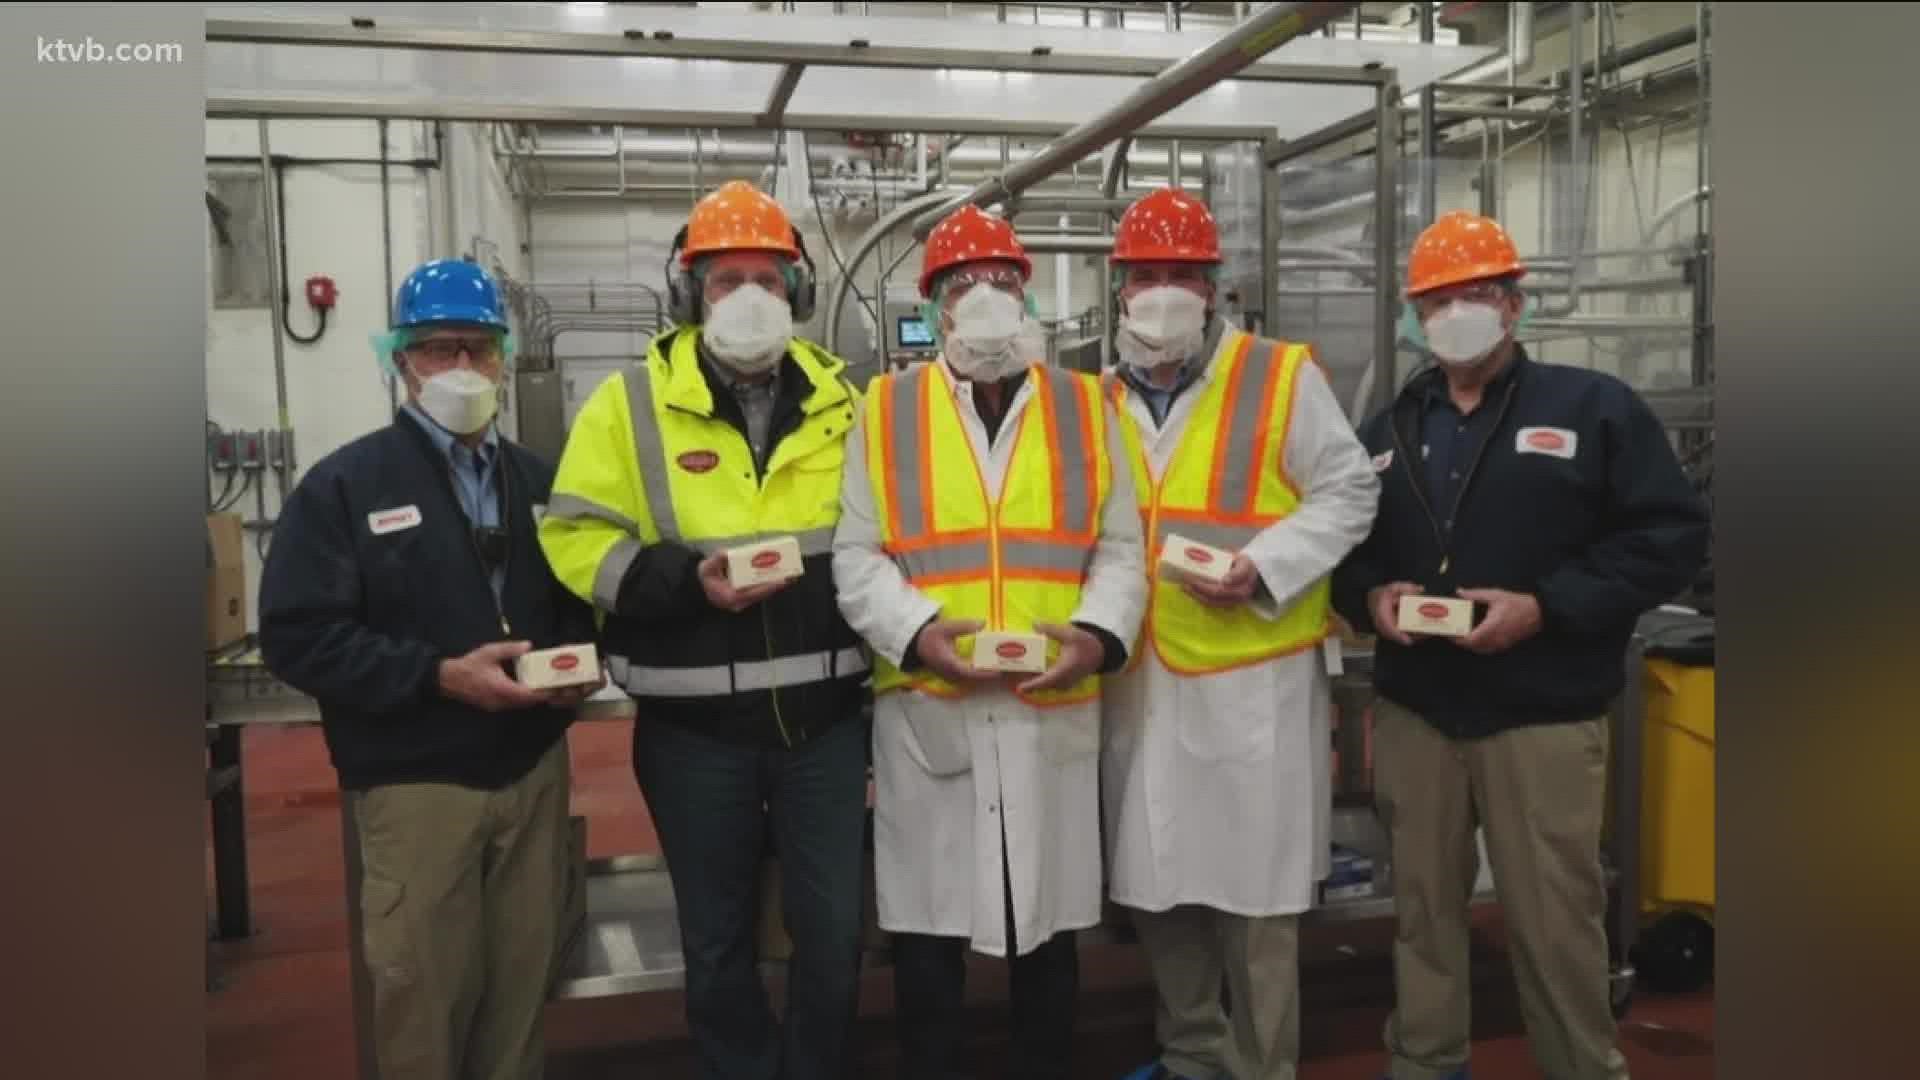 The company announced the resumption of partial butter production operations Feb. 2, four months after a devastating fire tore through the 91-year-old facility.